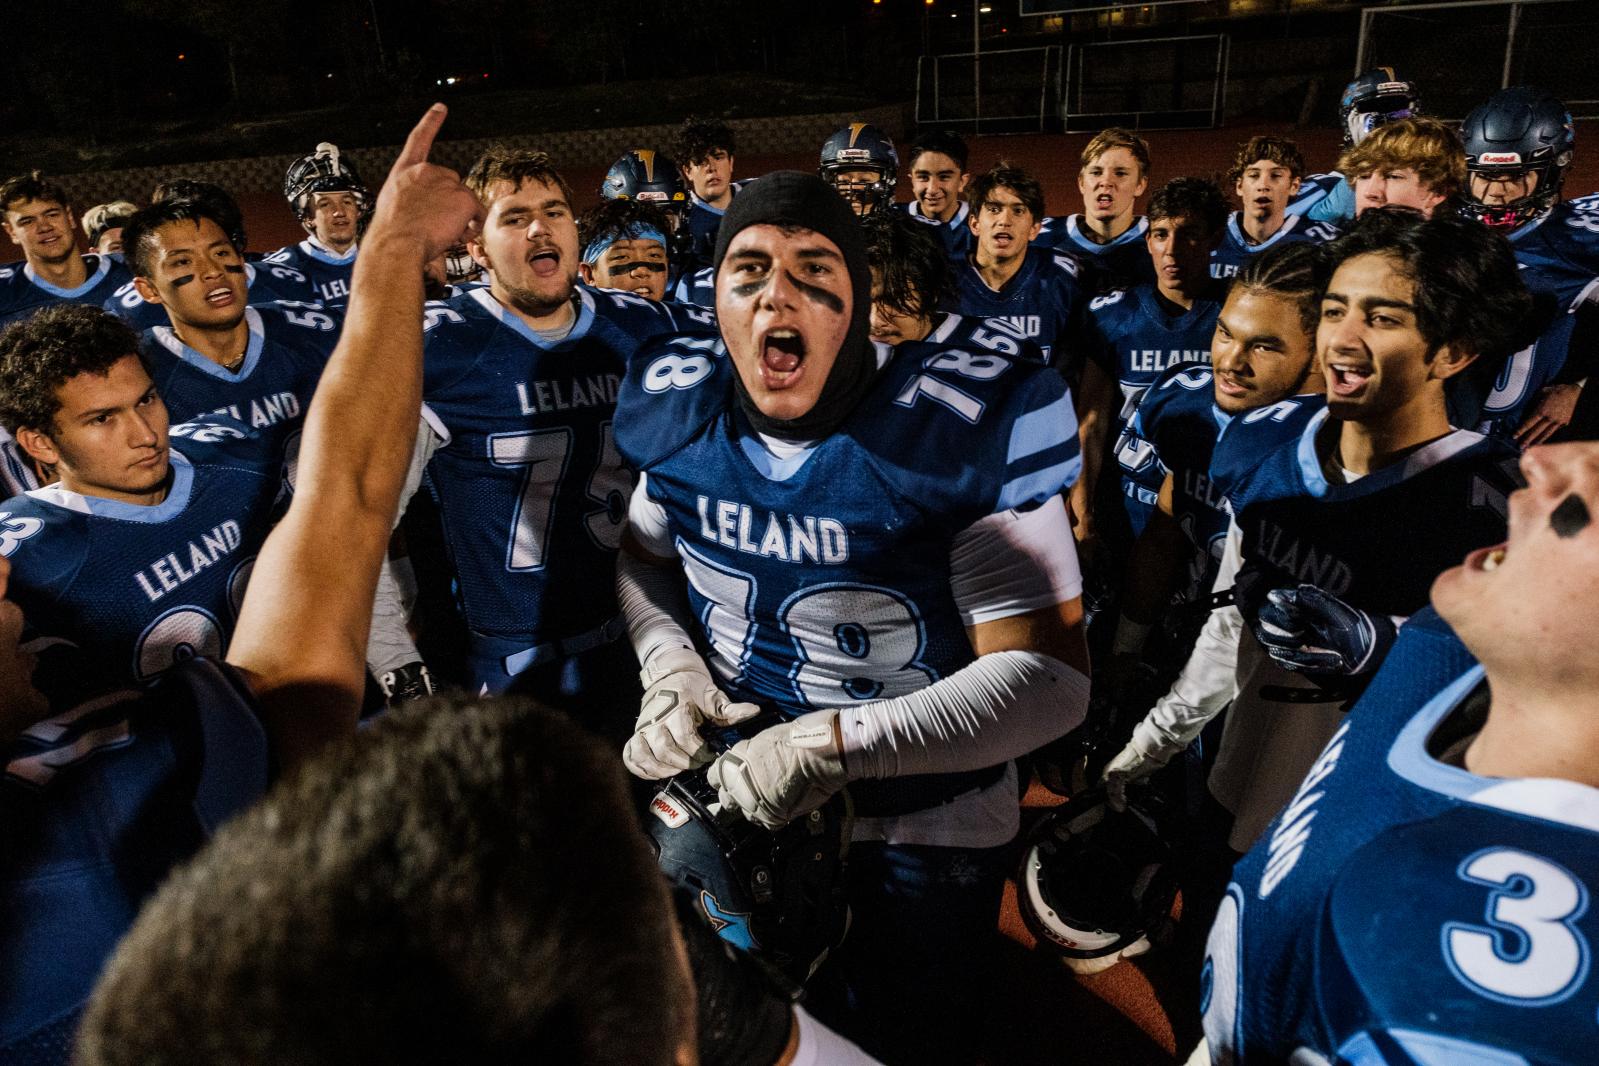 Image from SPORTS - Leland High School football players rally before a game...